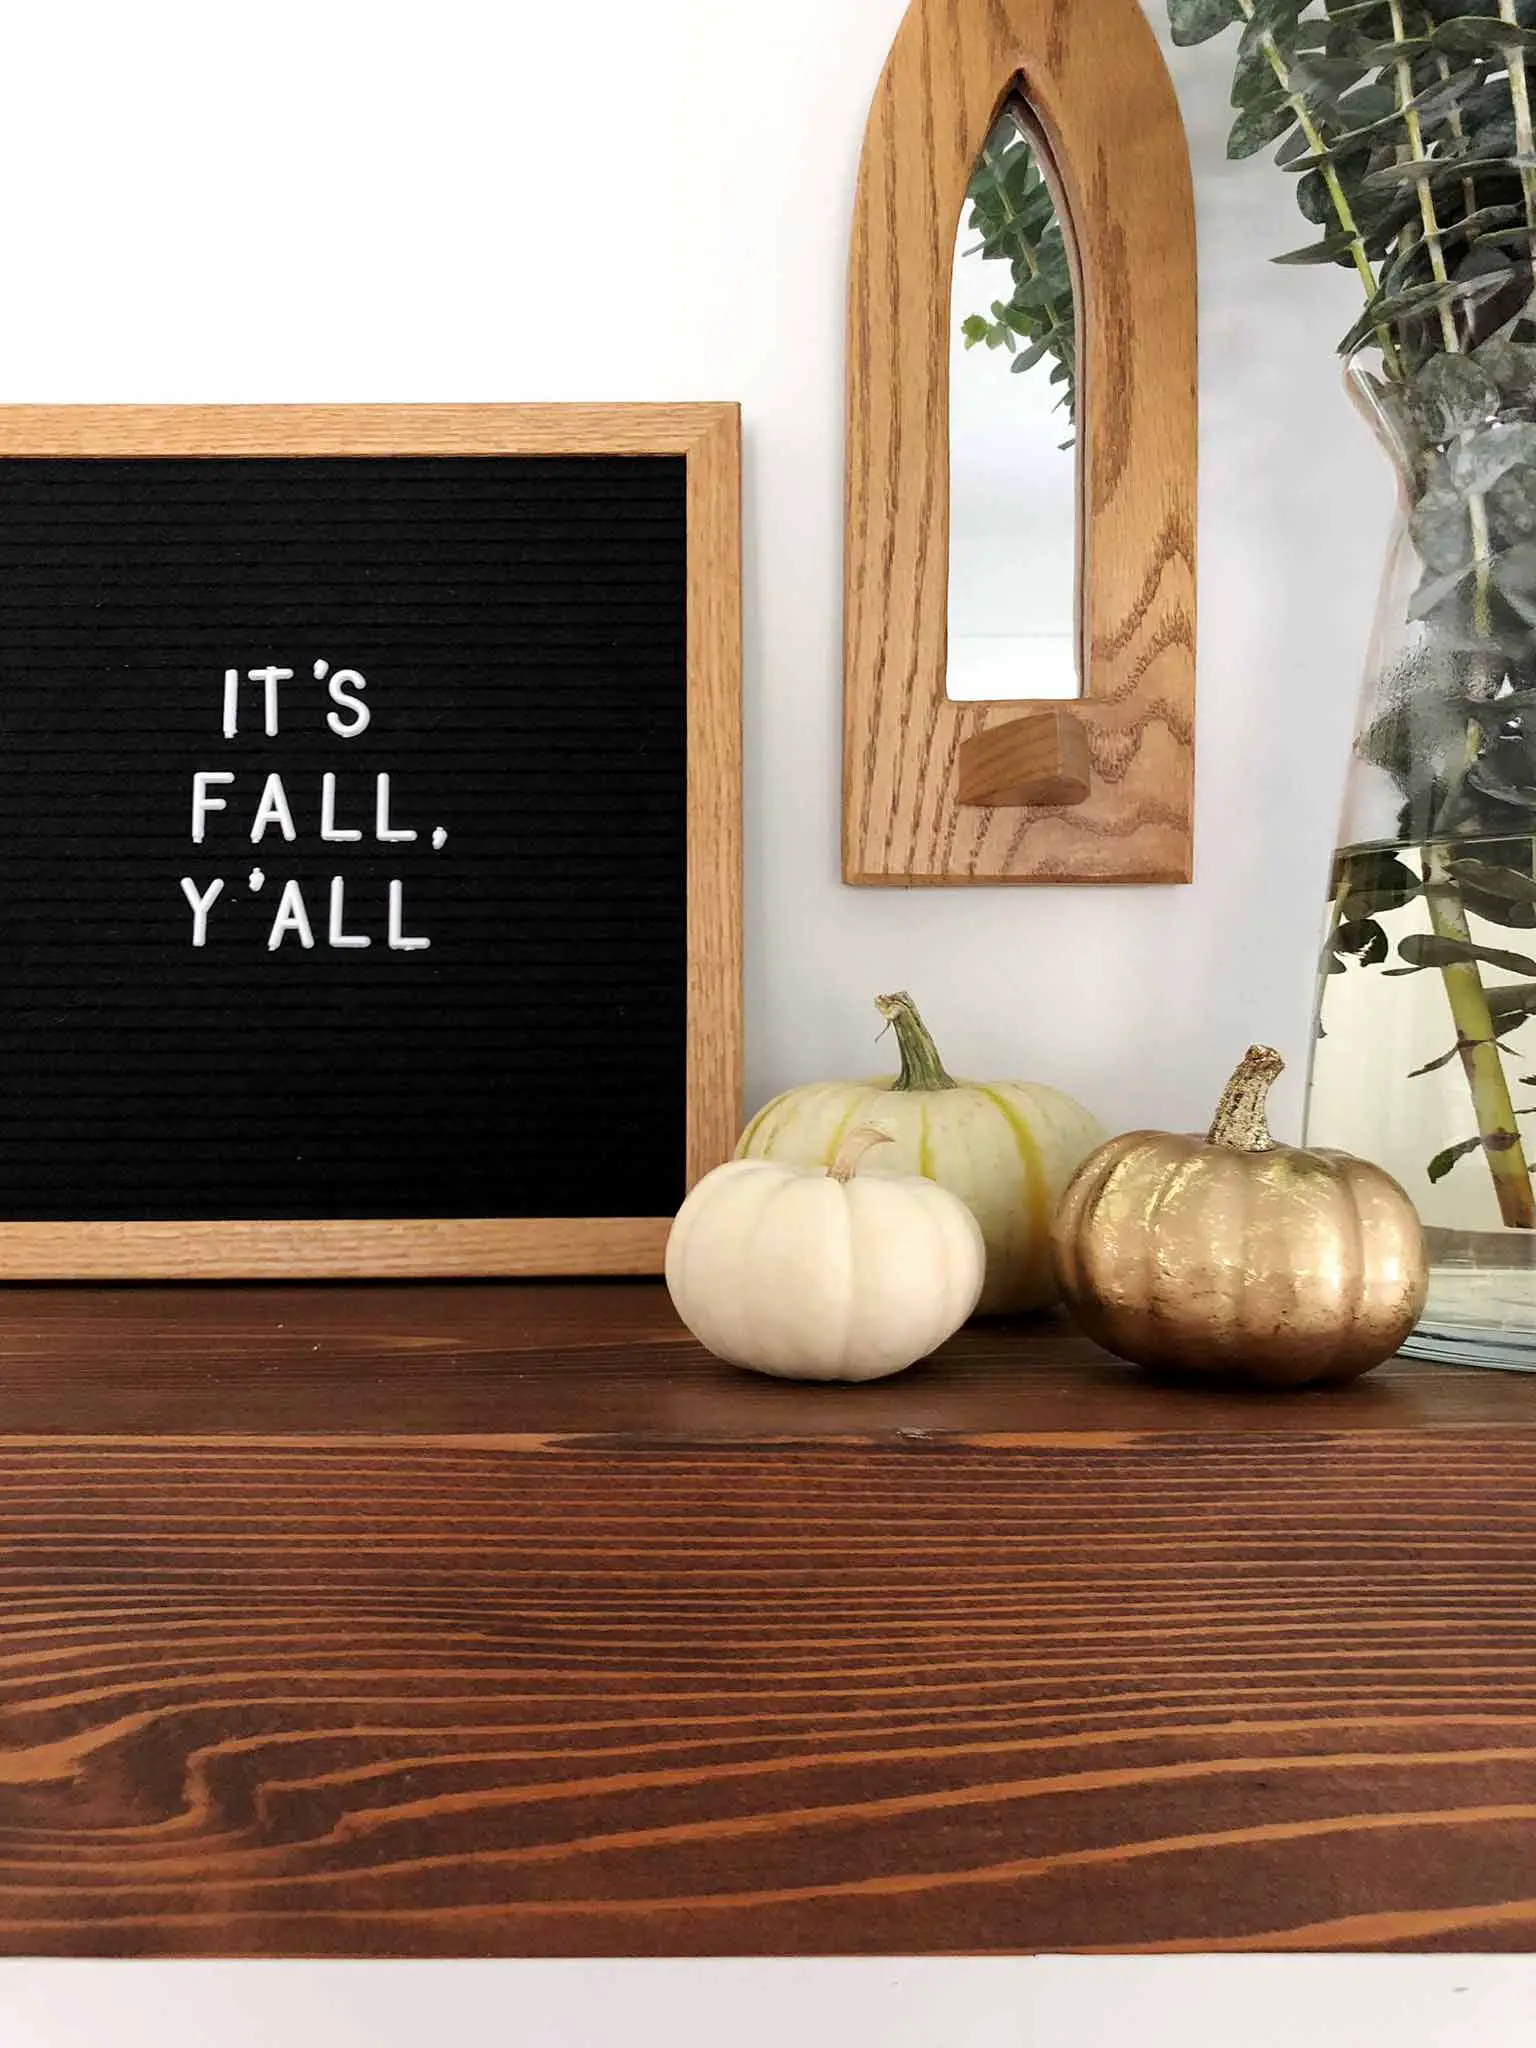 Mantel with a letterboard and pumpkins - Simple Fall Decor for the Uncluttered Home - That Homebird Life blog